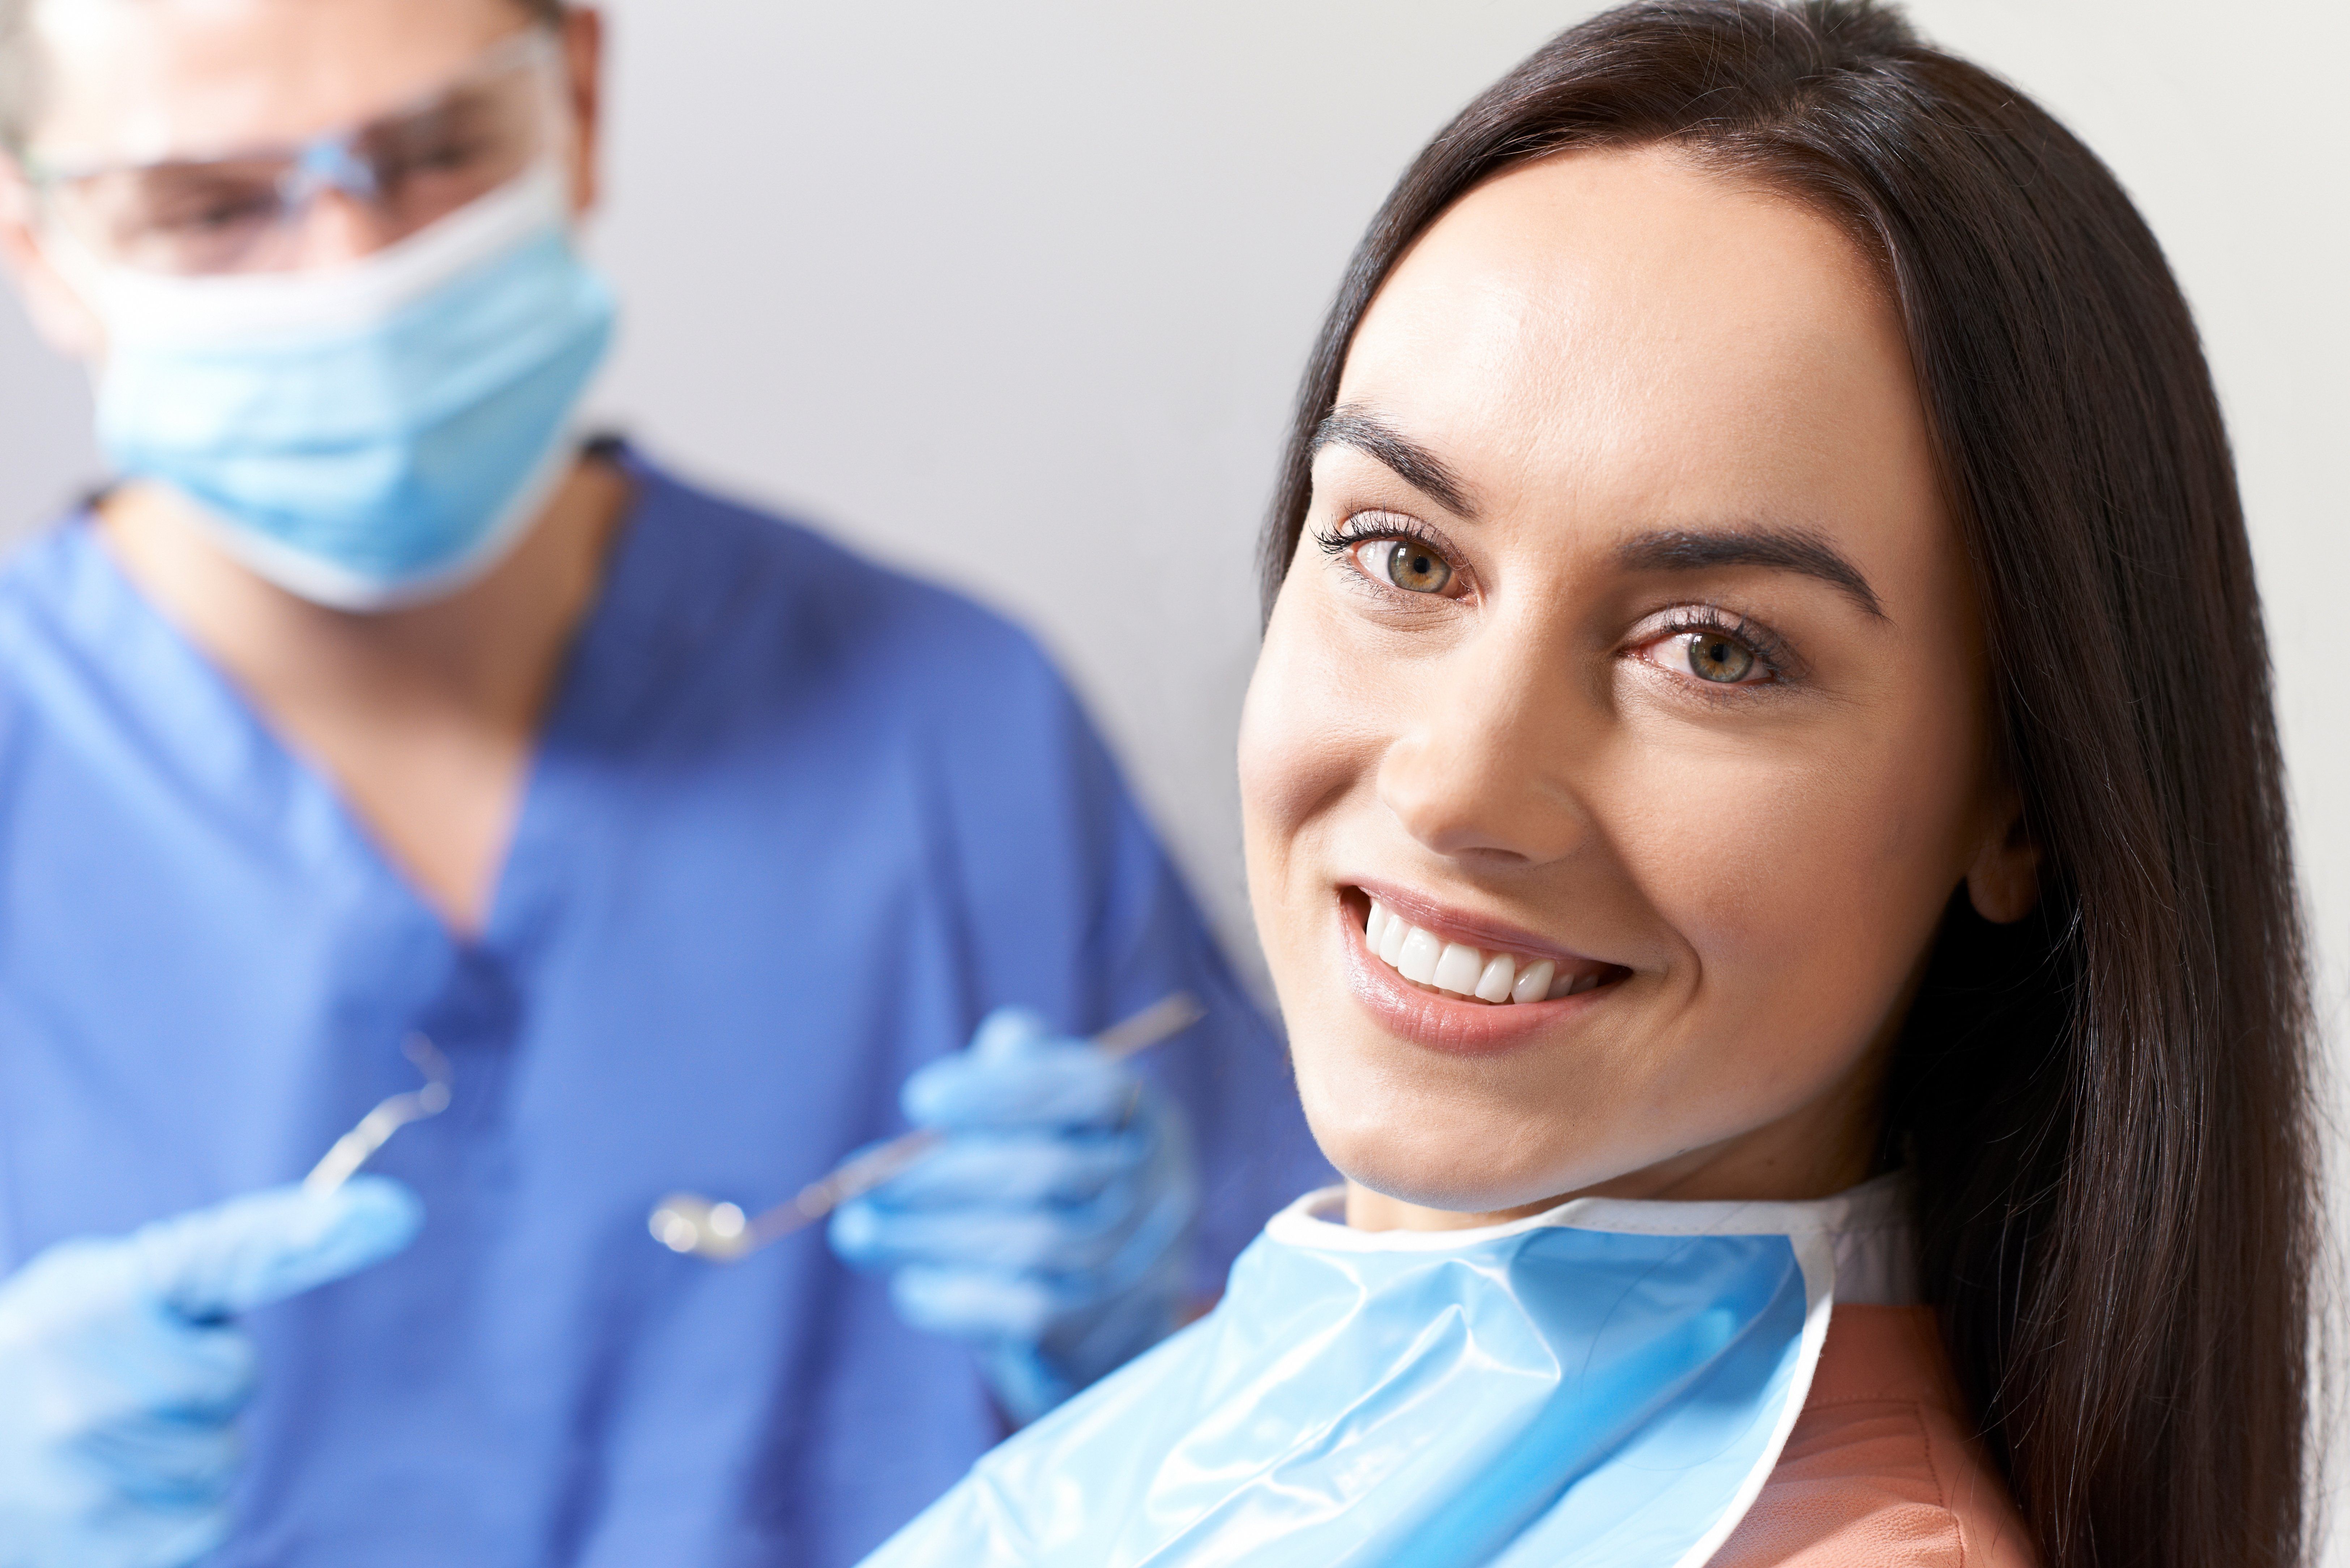 Ask These 5 Questions to Find the Best Dentist Near You